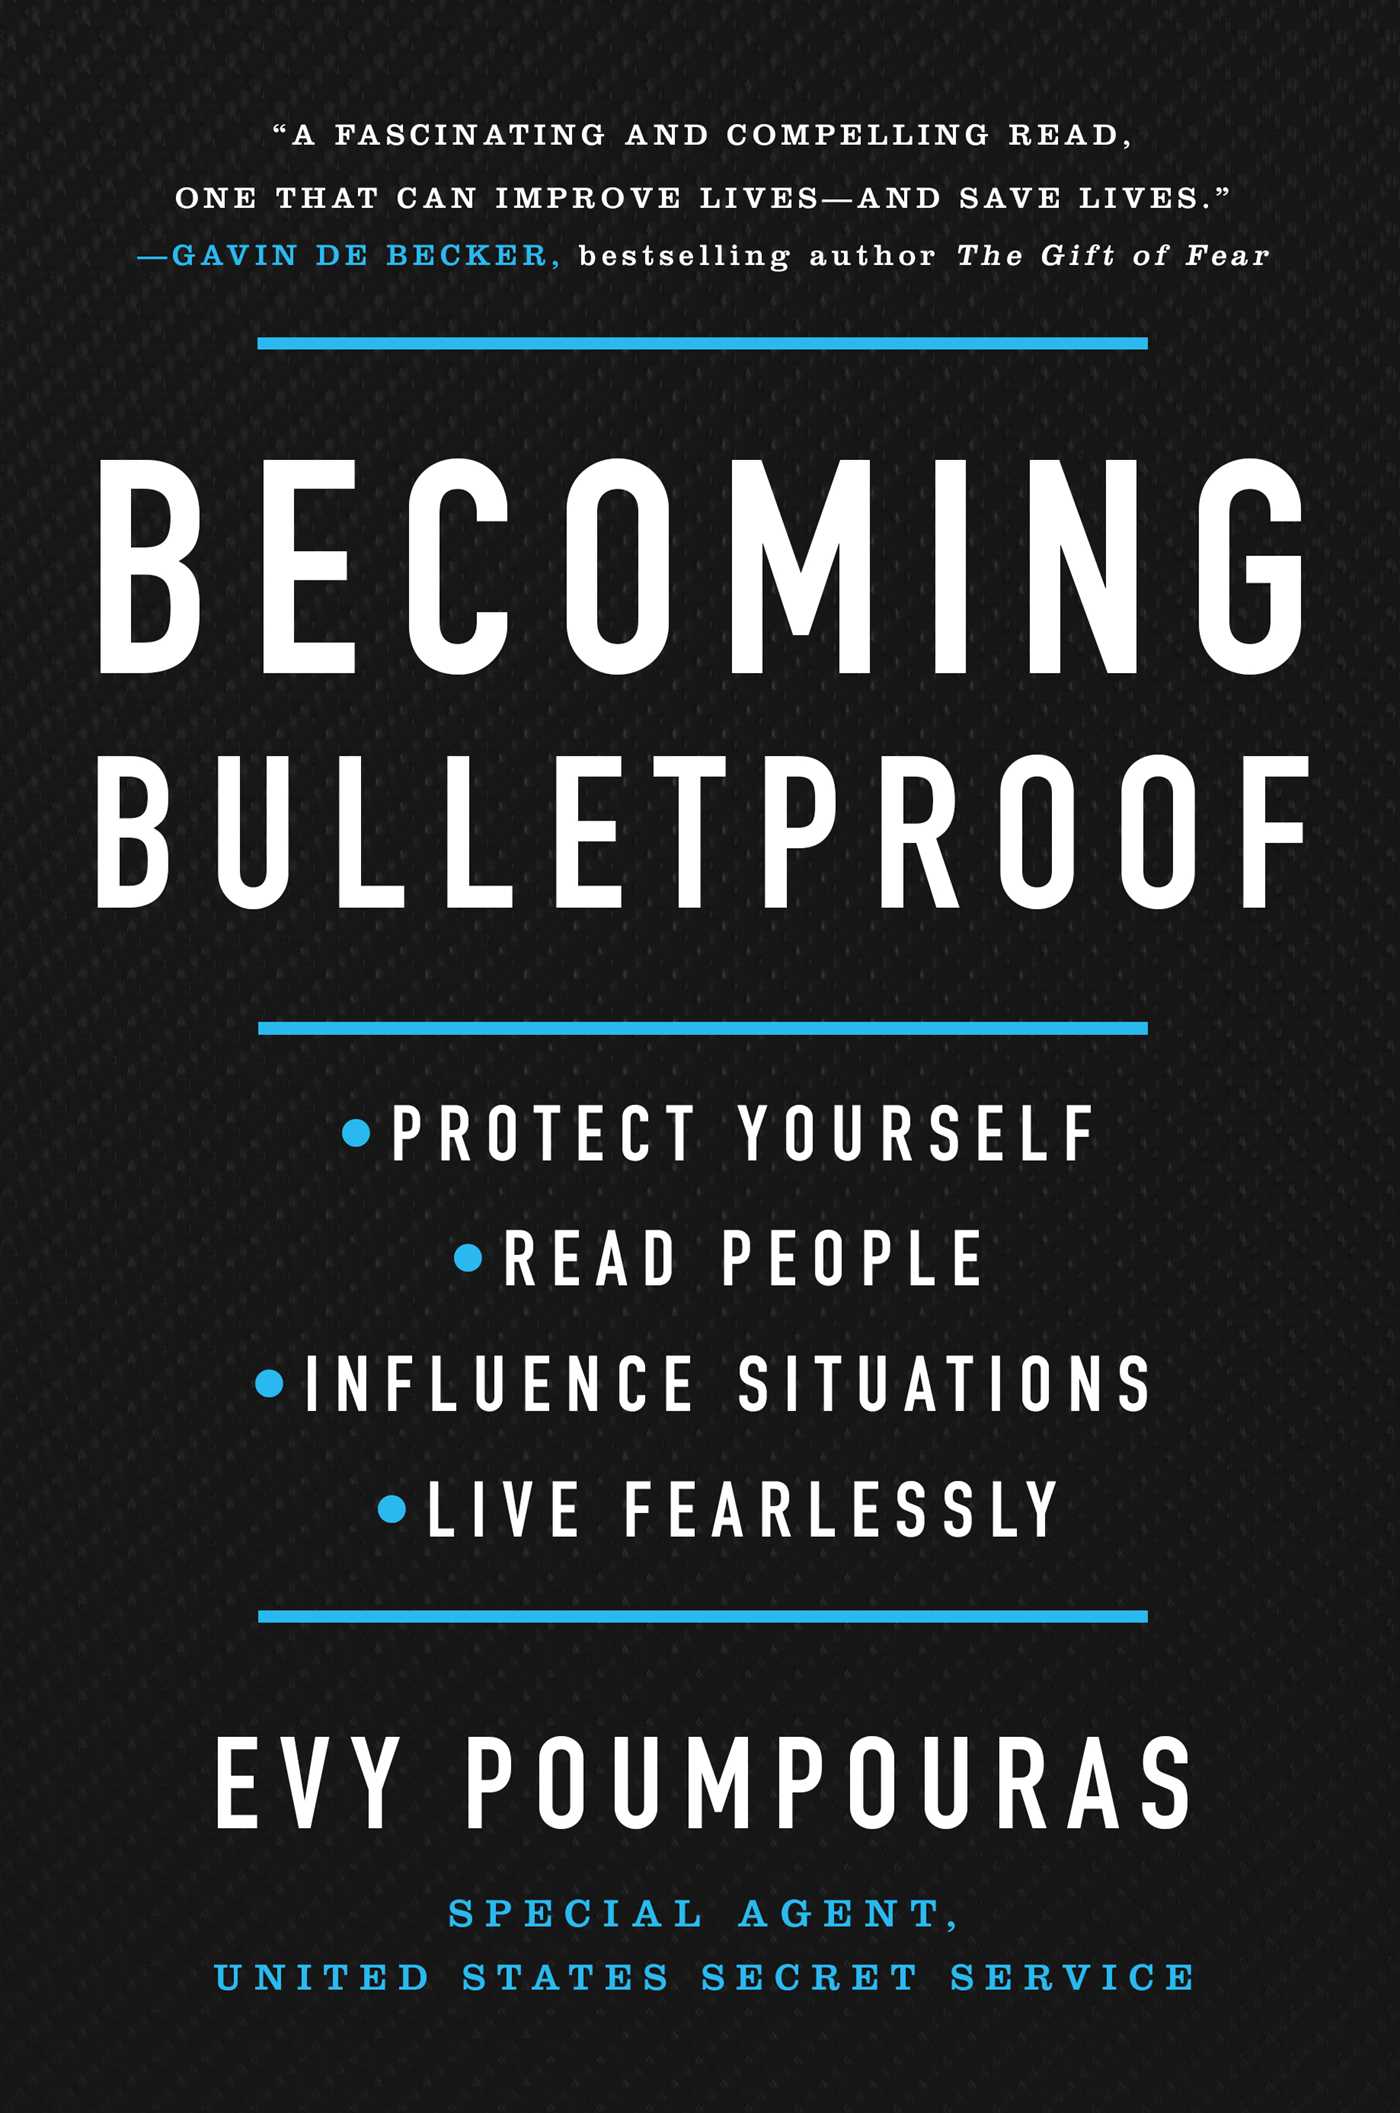 [EPUB] Becoming Bulletproof: Protect Yourself, Read People, Influence Situations, and Live Fearlessly by Evy Poumpouras